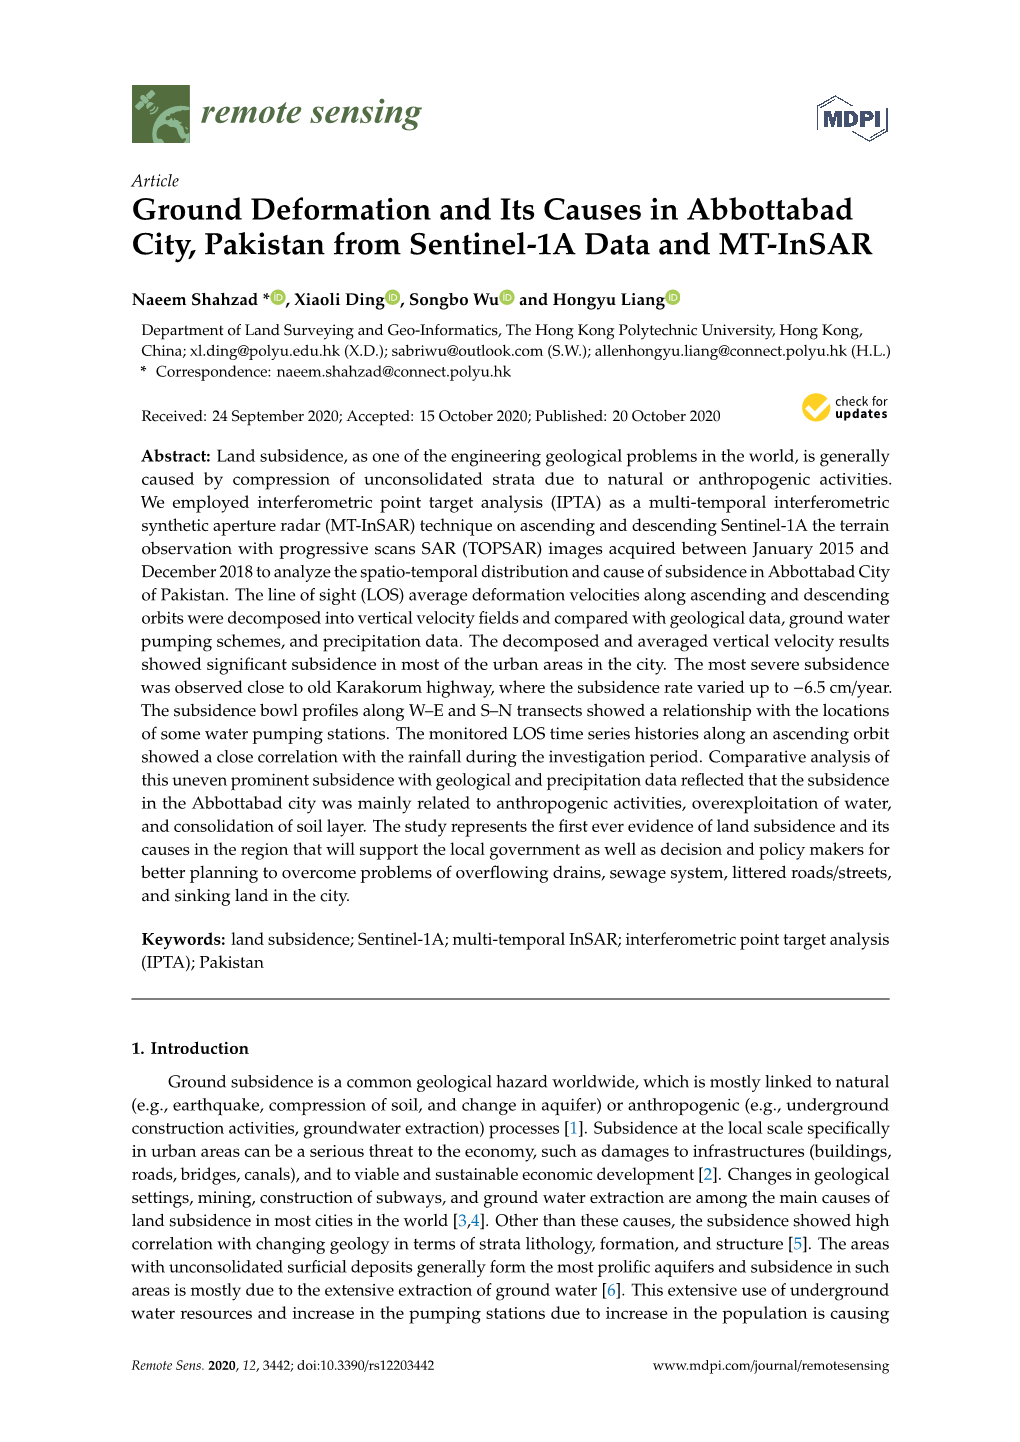 Ground Deformation and Its Causes in Abbottabad City, Pakistan from Sentinel-1A Data and MT-Insar